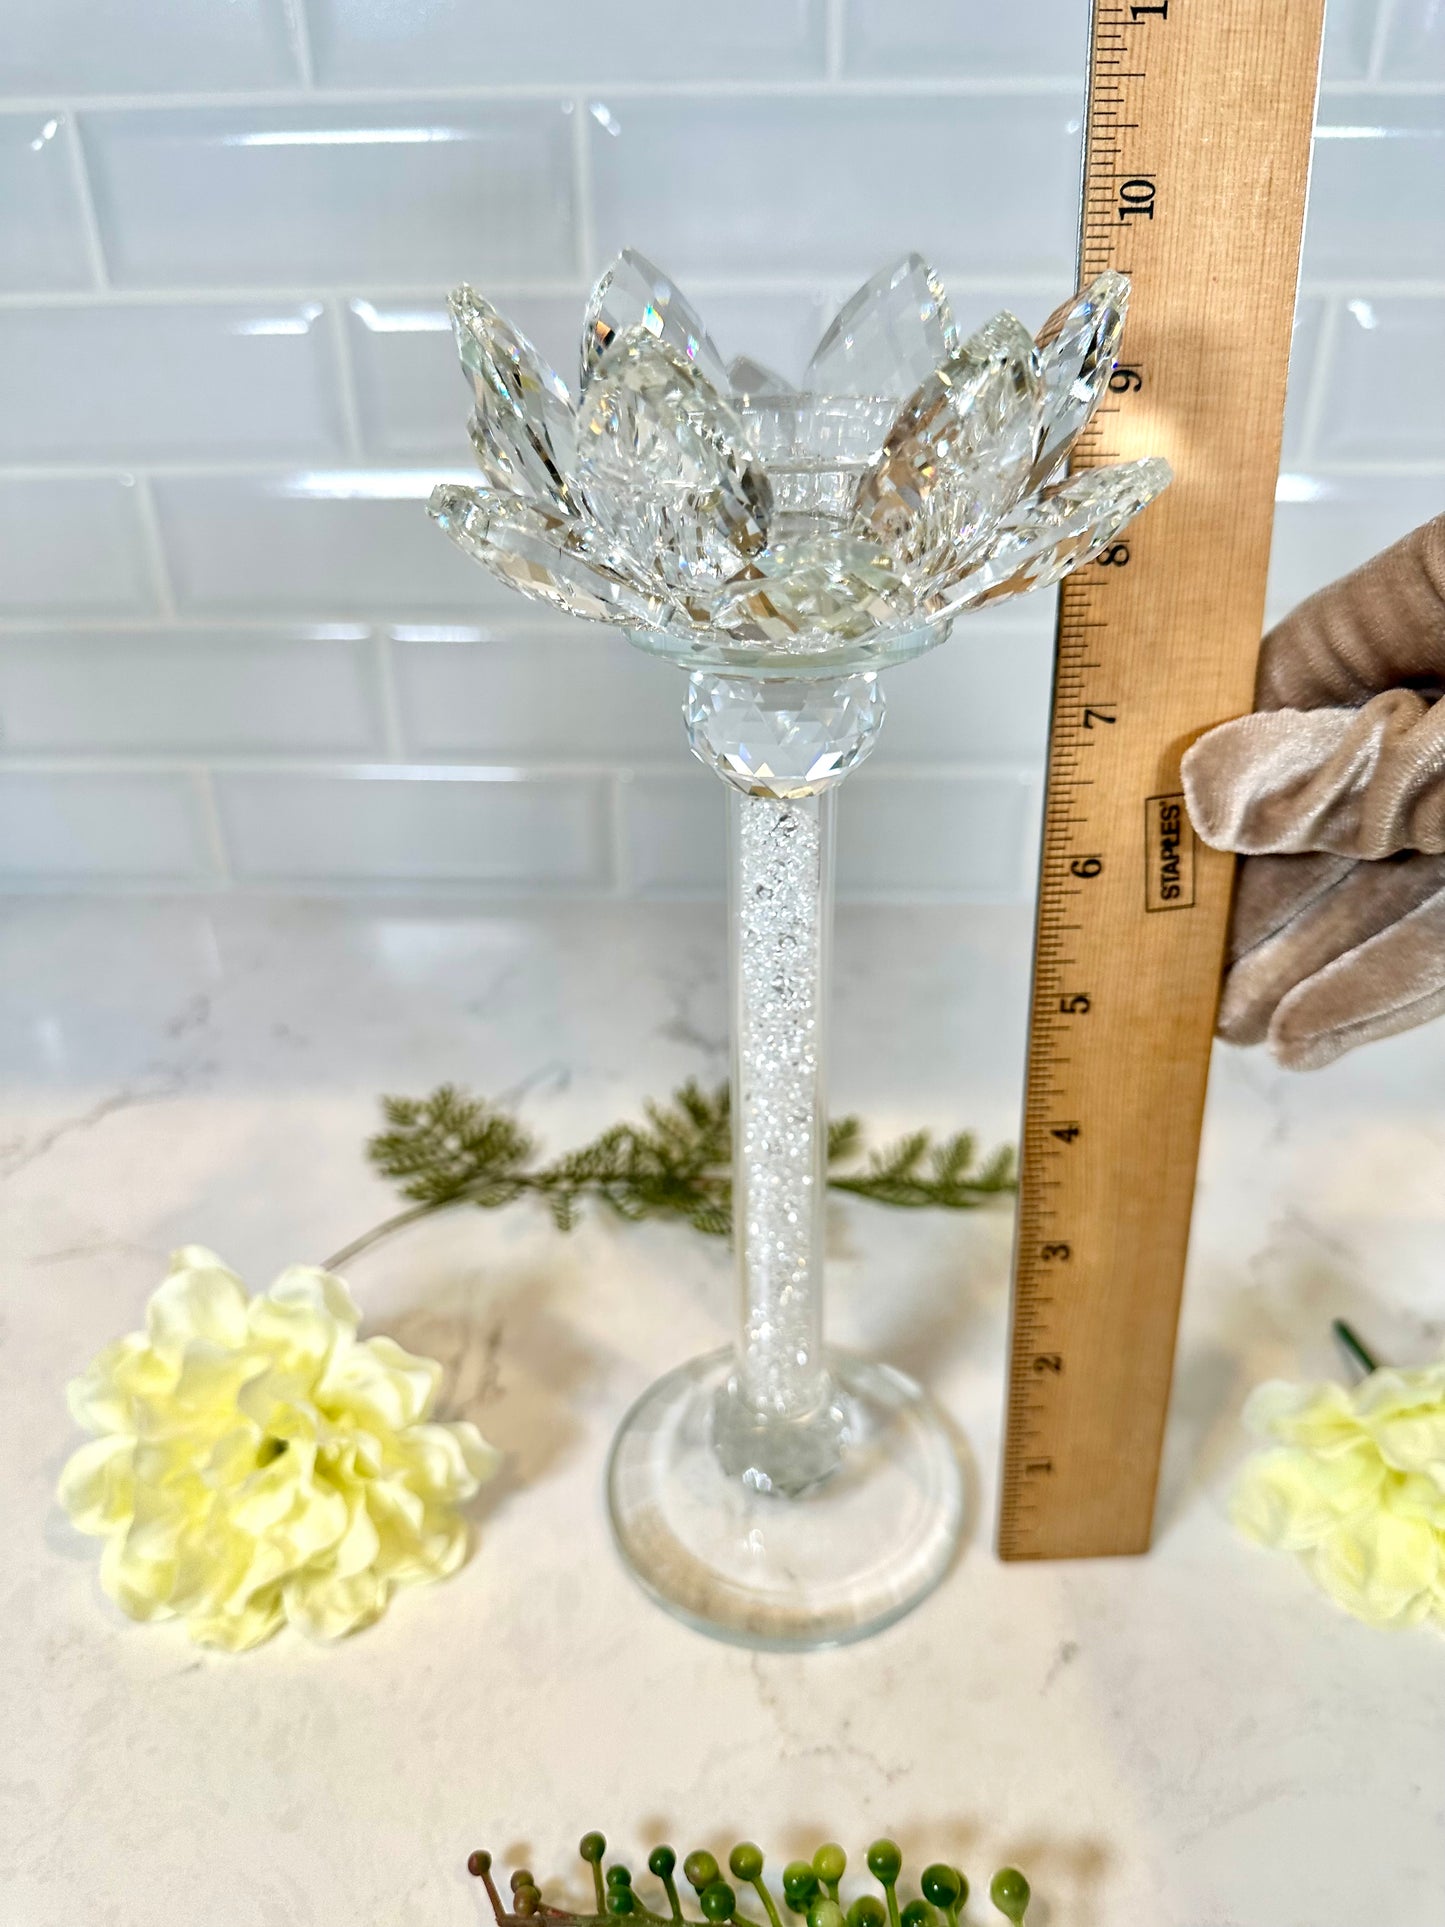 Glass Crystal Sphere and Votive Candle Holder (9.4 inch.)